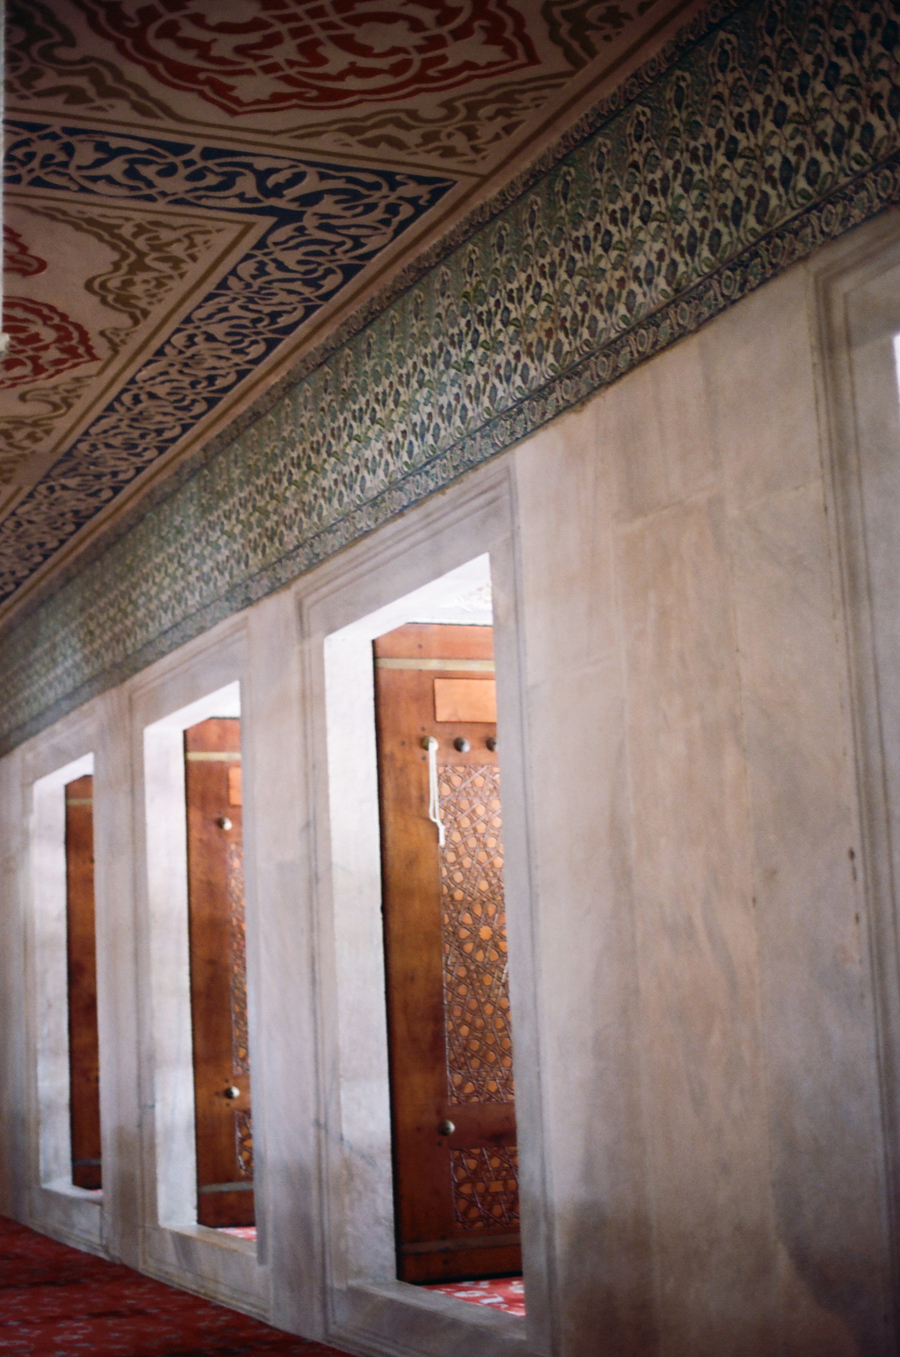 Interior Details at the Istanbul Blue Mosque